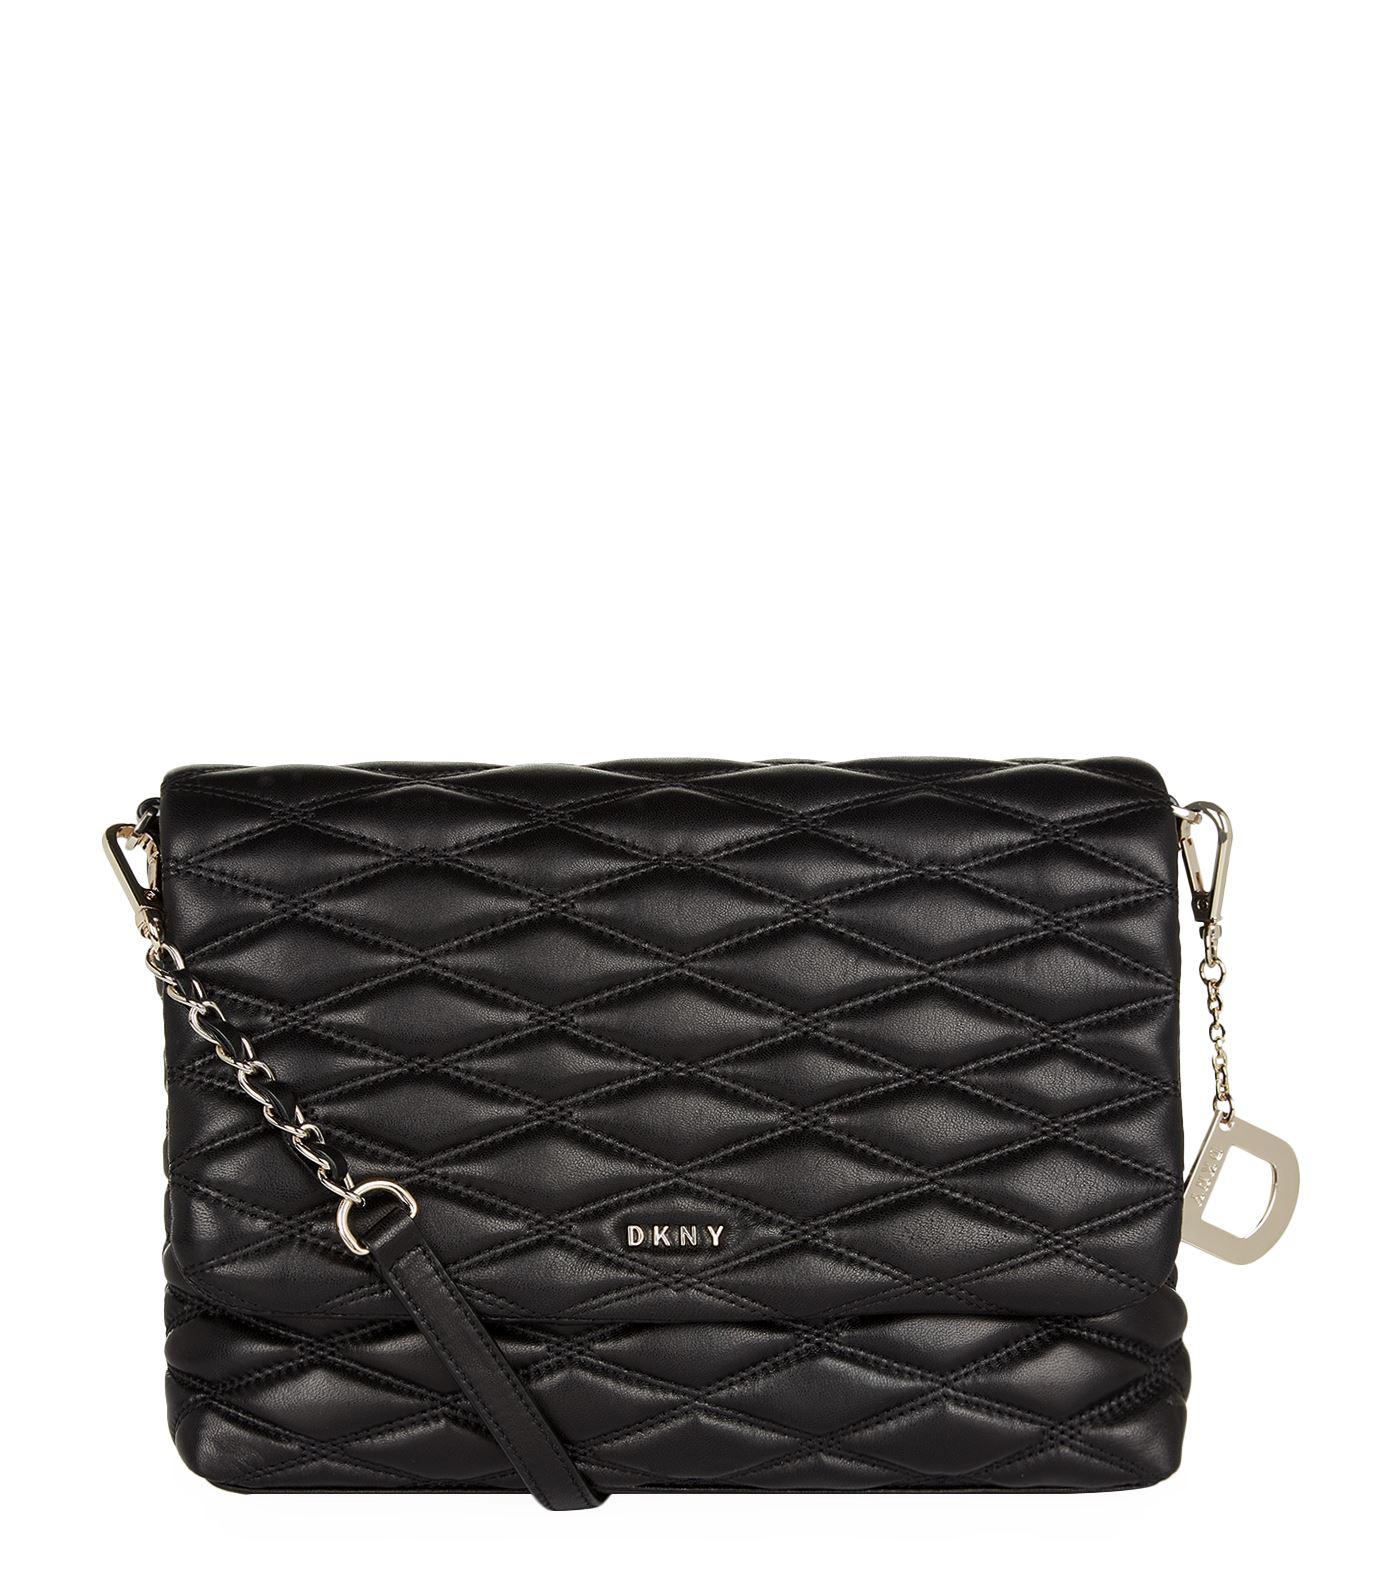 DKNY Leather Quilted Cross Body Bag in Black - Lyst